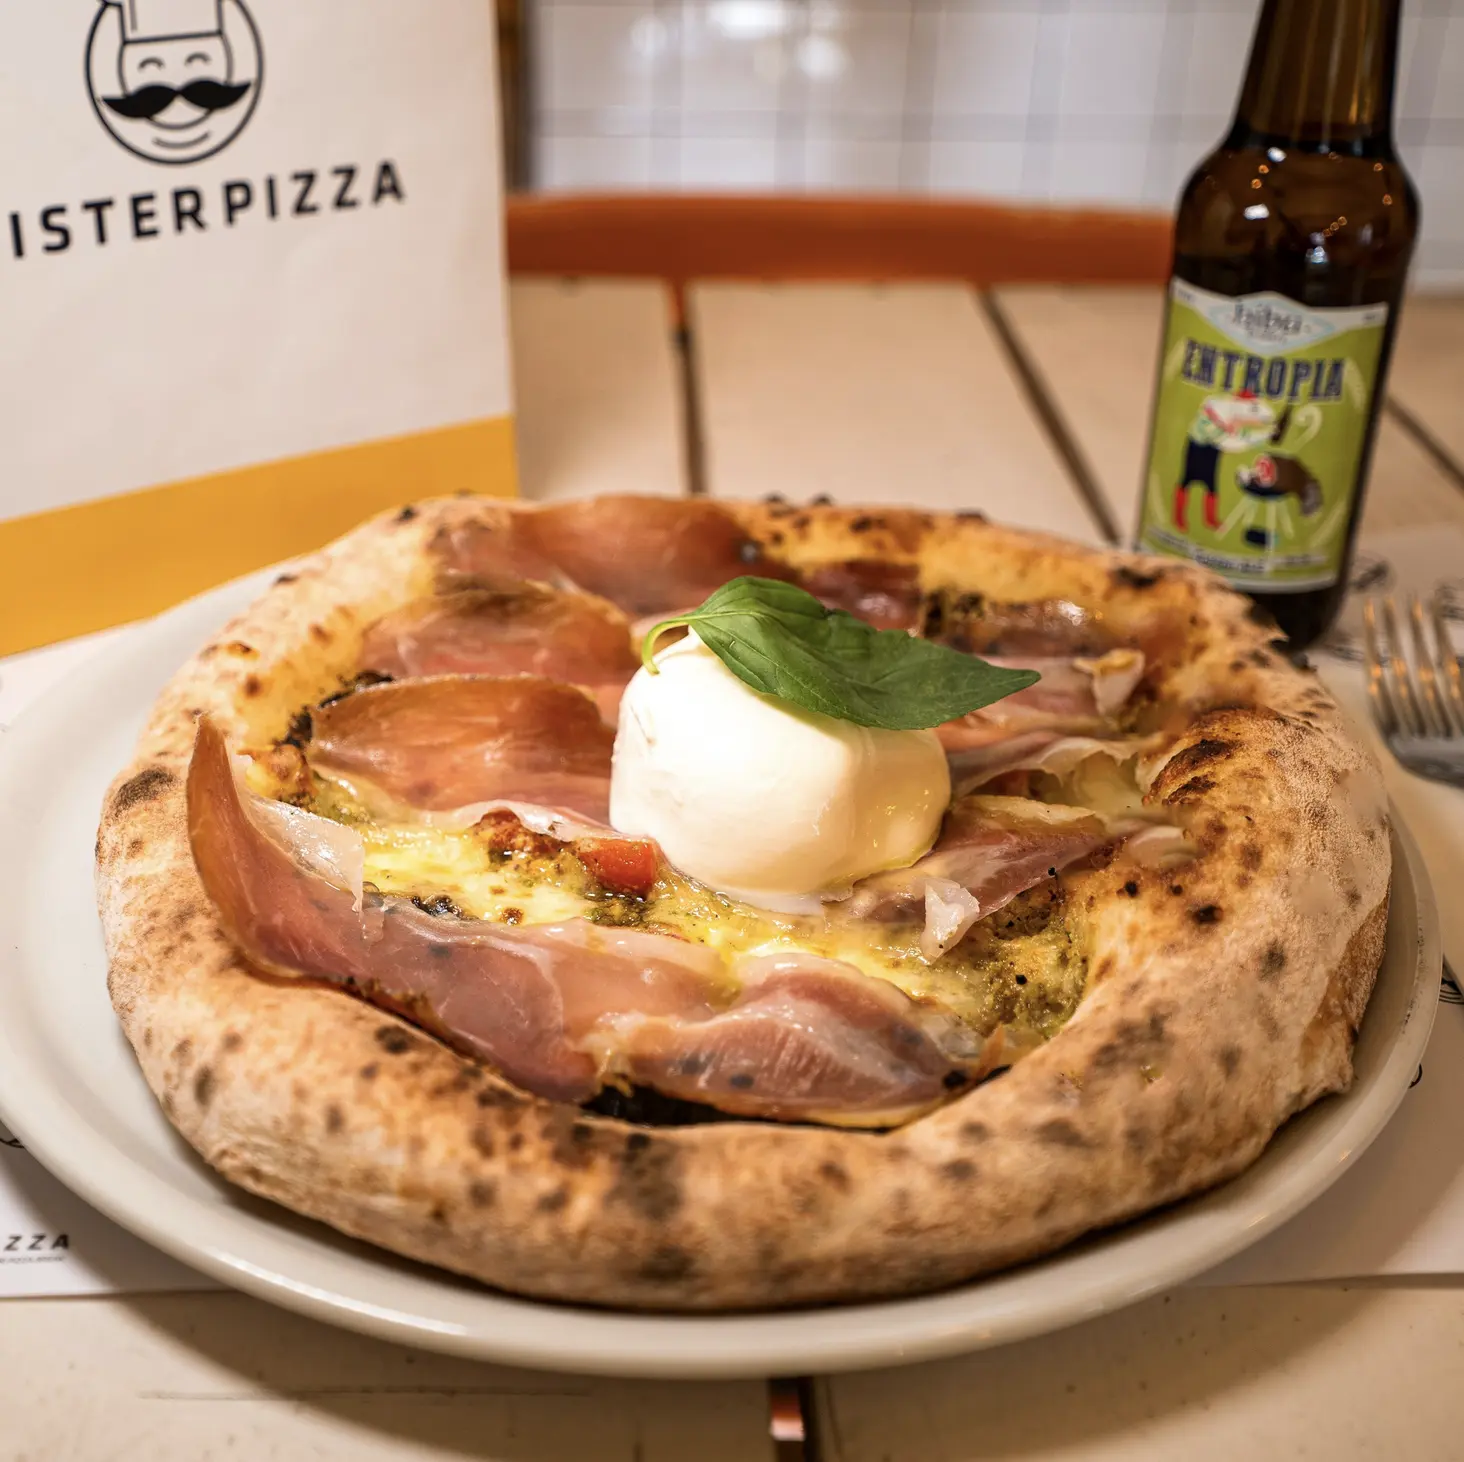 Gluten-free pizza from Mister Pizza in Florence, Italy